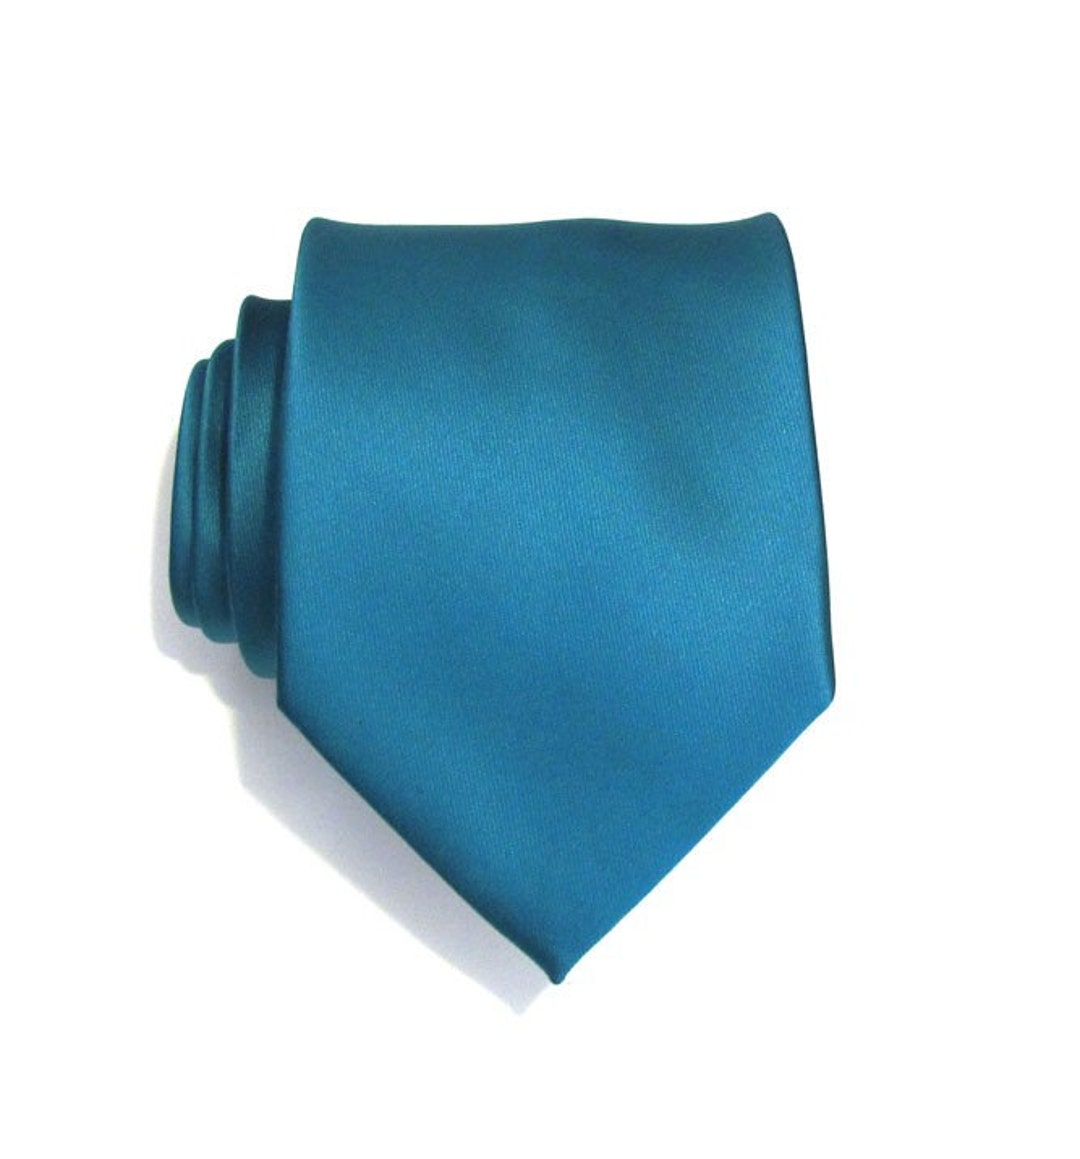 Teal Mens Tie With Matching Pocket Square Teal Silk Necktie - Etsy